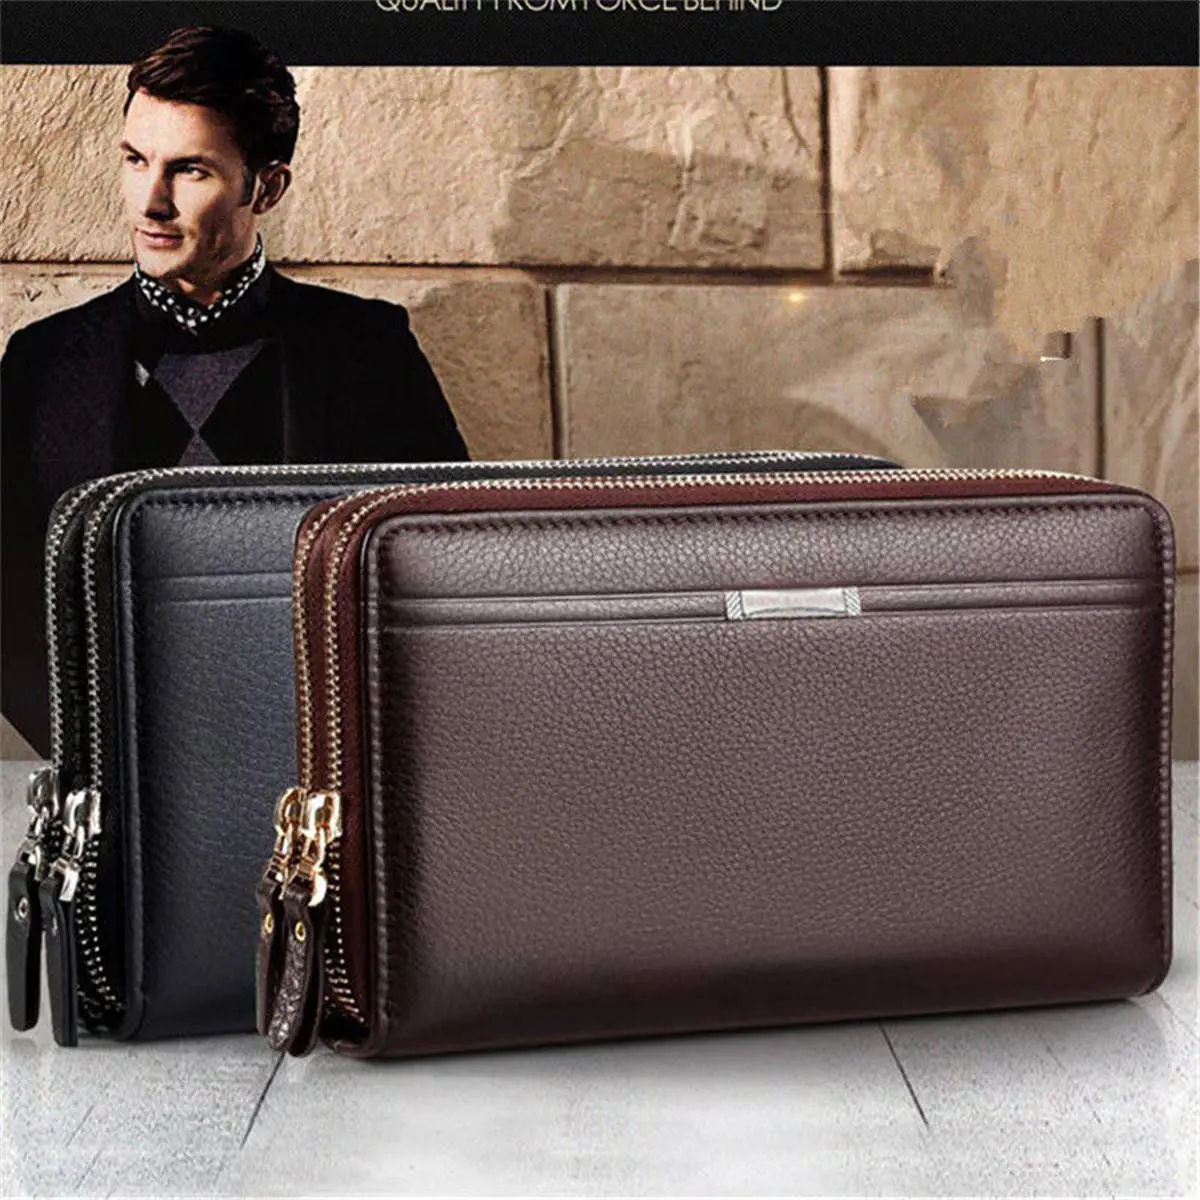 Business Men Leather Clutches.